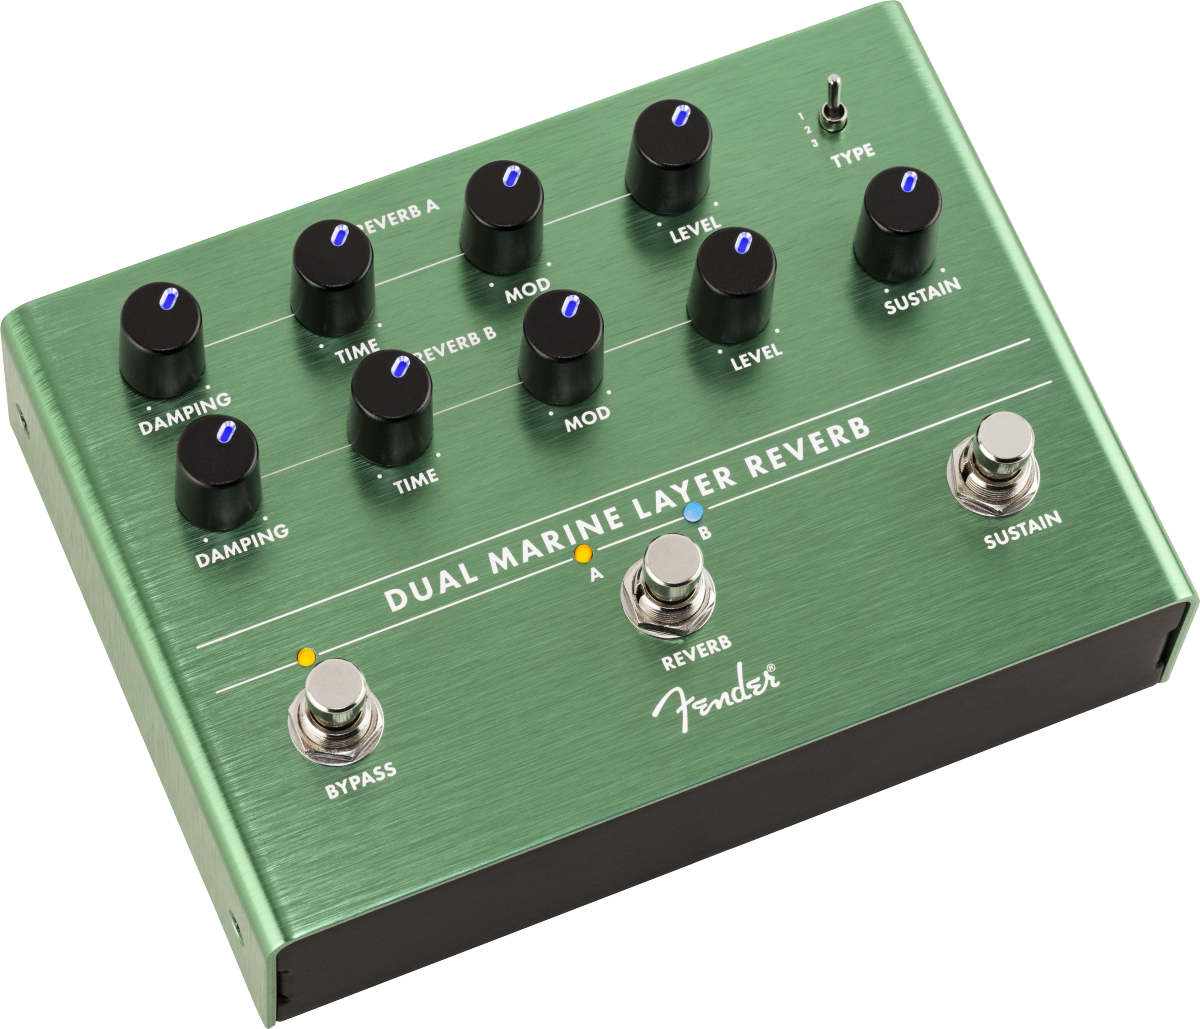 Fender Dual Marine Layer Reverb - Reverb/delay/echo effect pedaal - Main picture